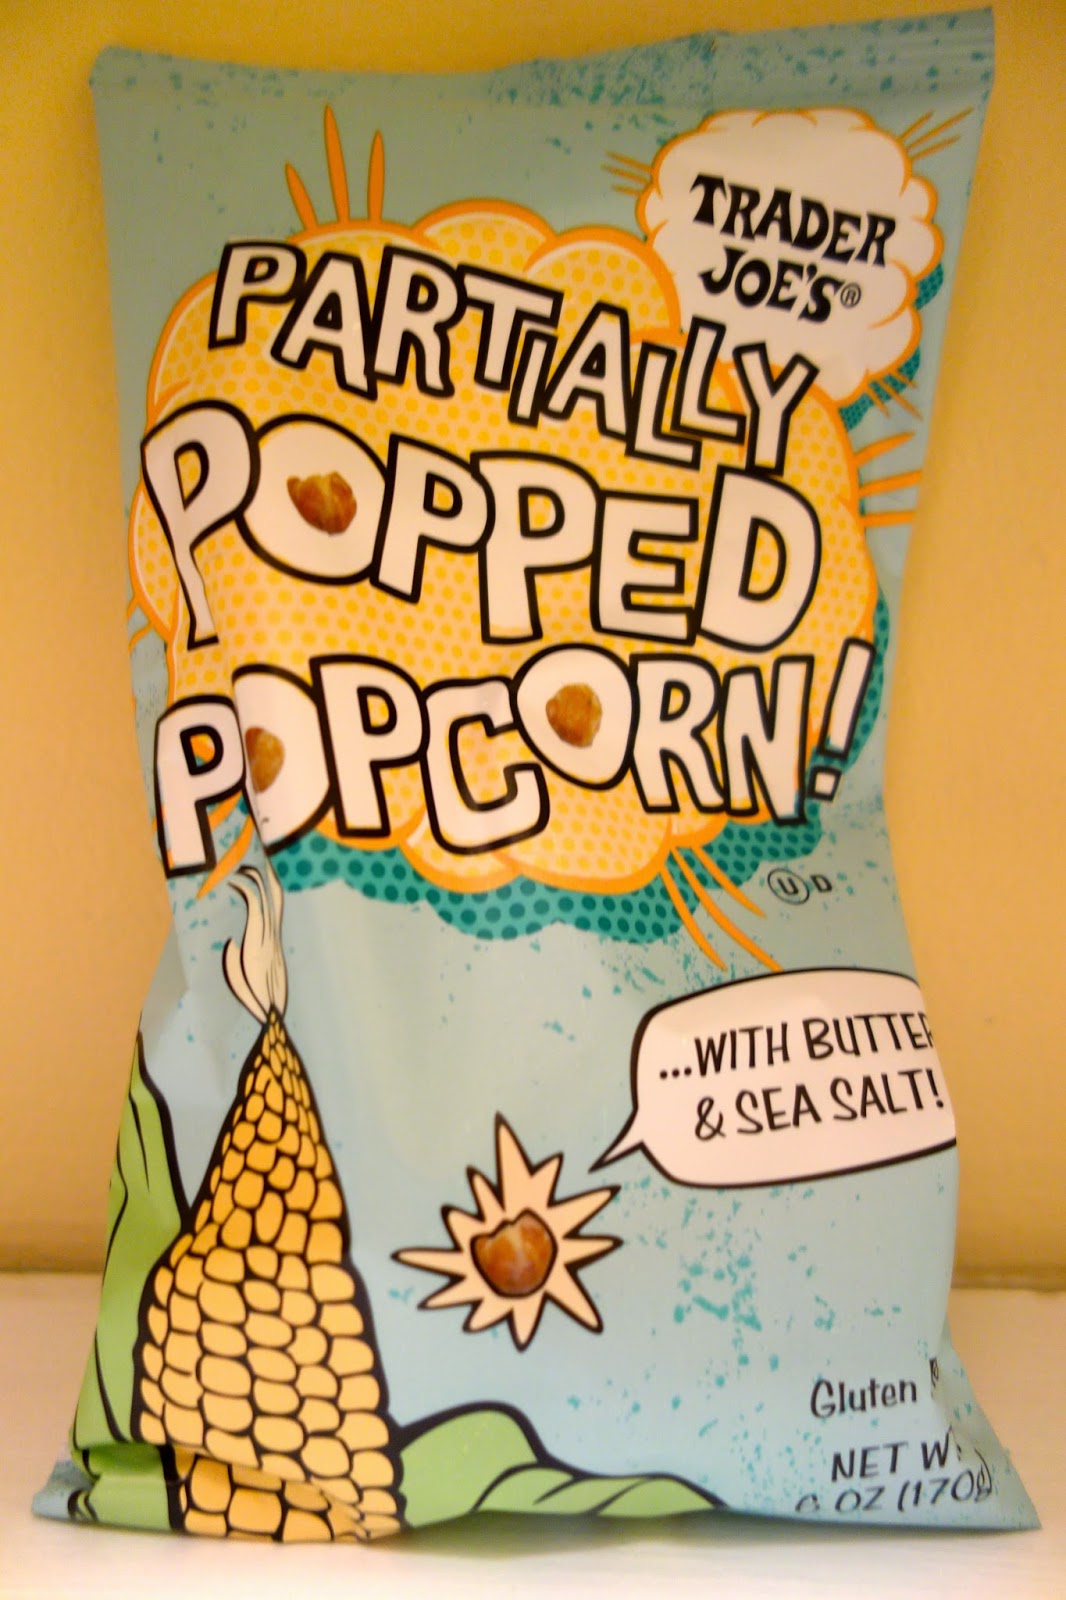 Trader Joe's Partially Popped Popcorn...with Butter & Sea Salt!